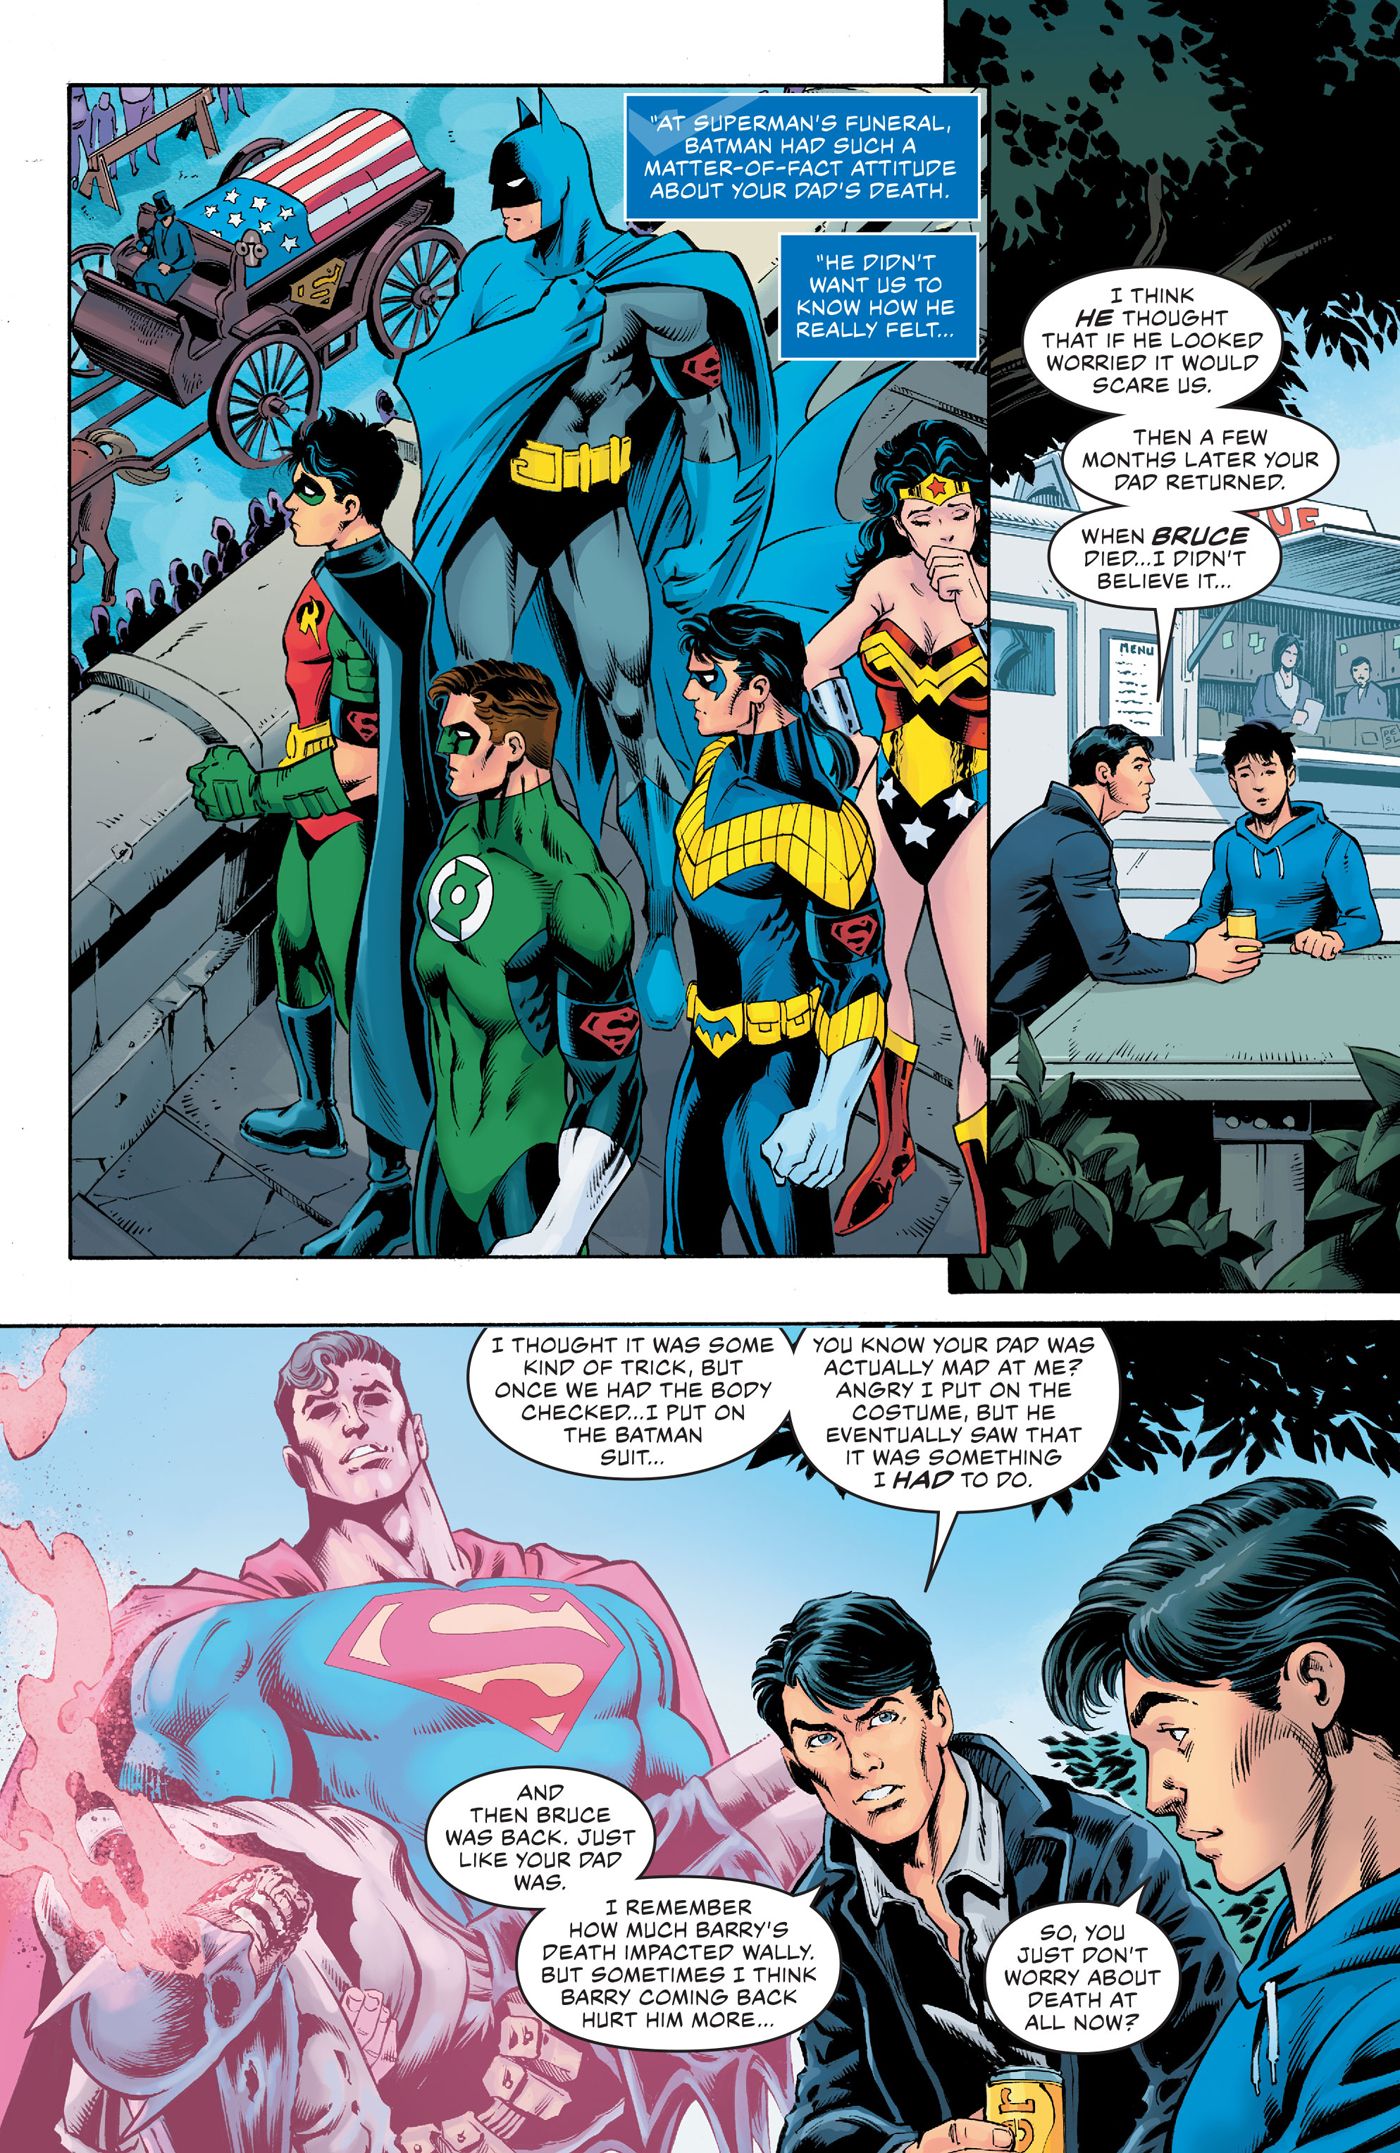 Nightwing Gives DC's New Superman an Important History Lesson About His ...